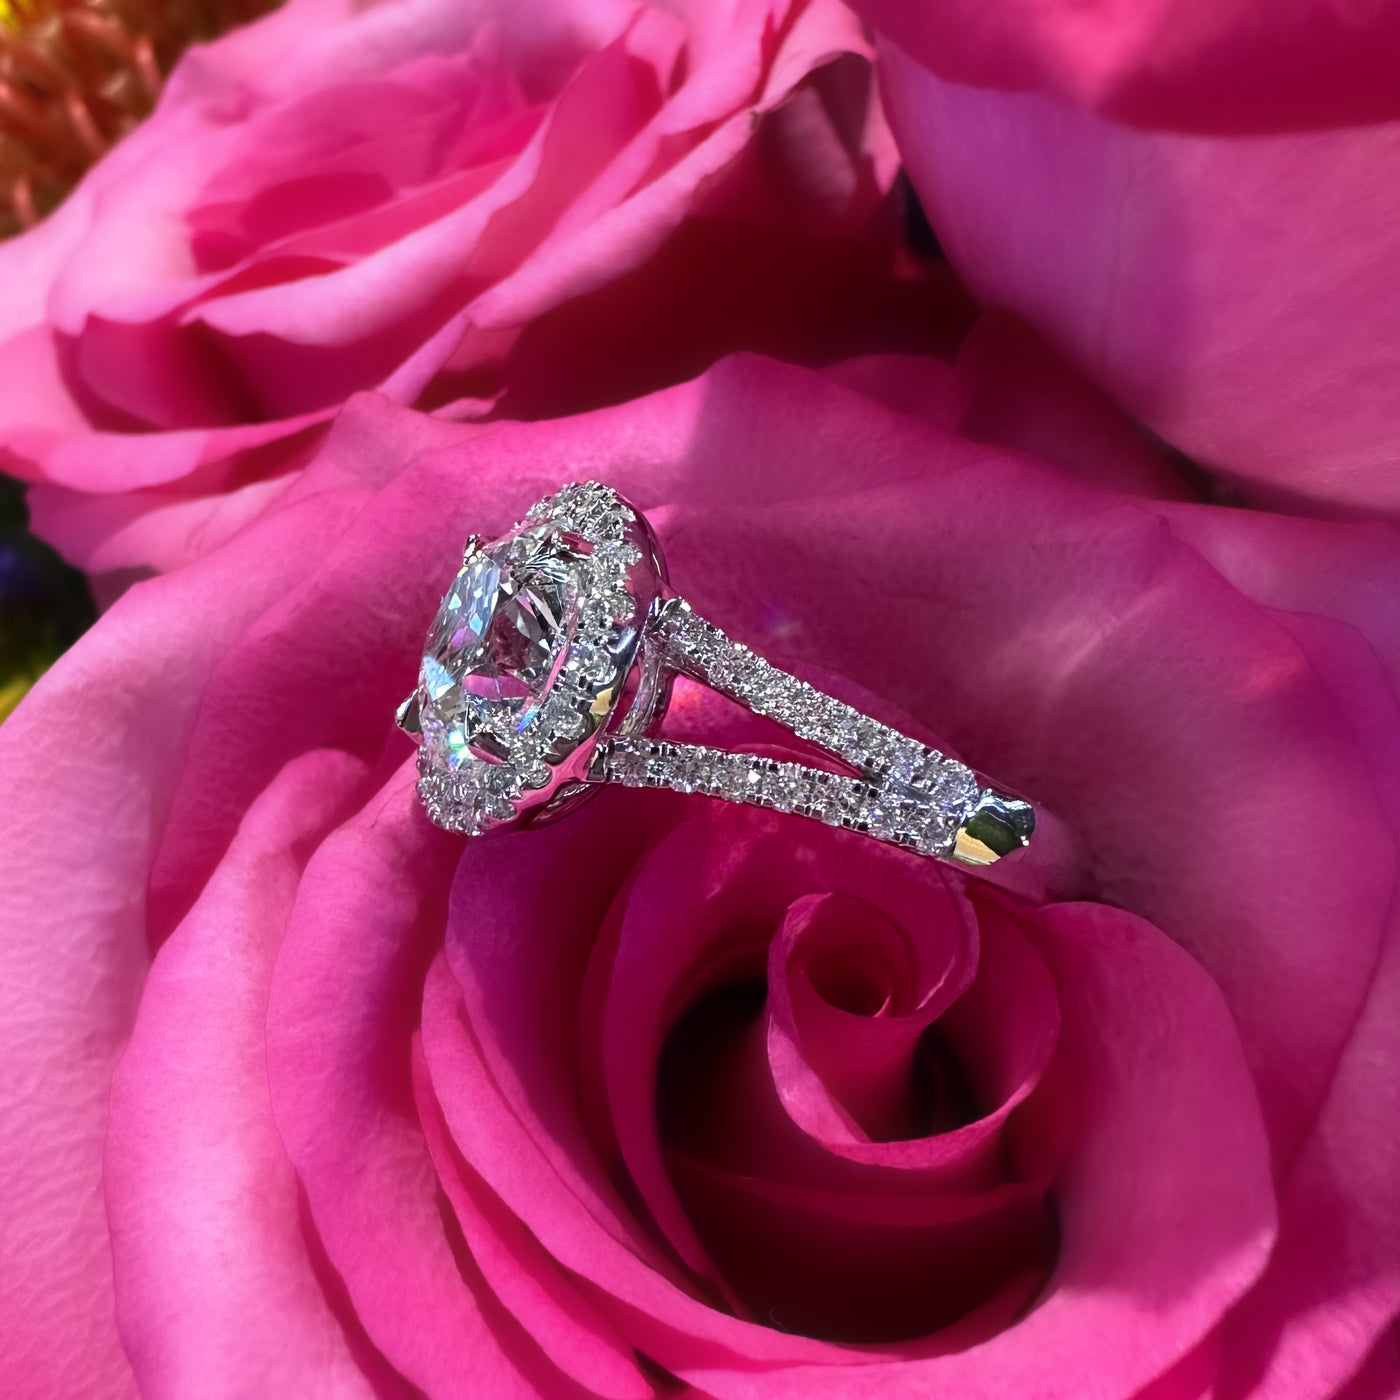  Apparel & Accessories > Jewelry > Rings Ready to Wear Diamond Halo 14K White Gold Engagement Ring Pierce Custom Jewelers